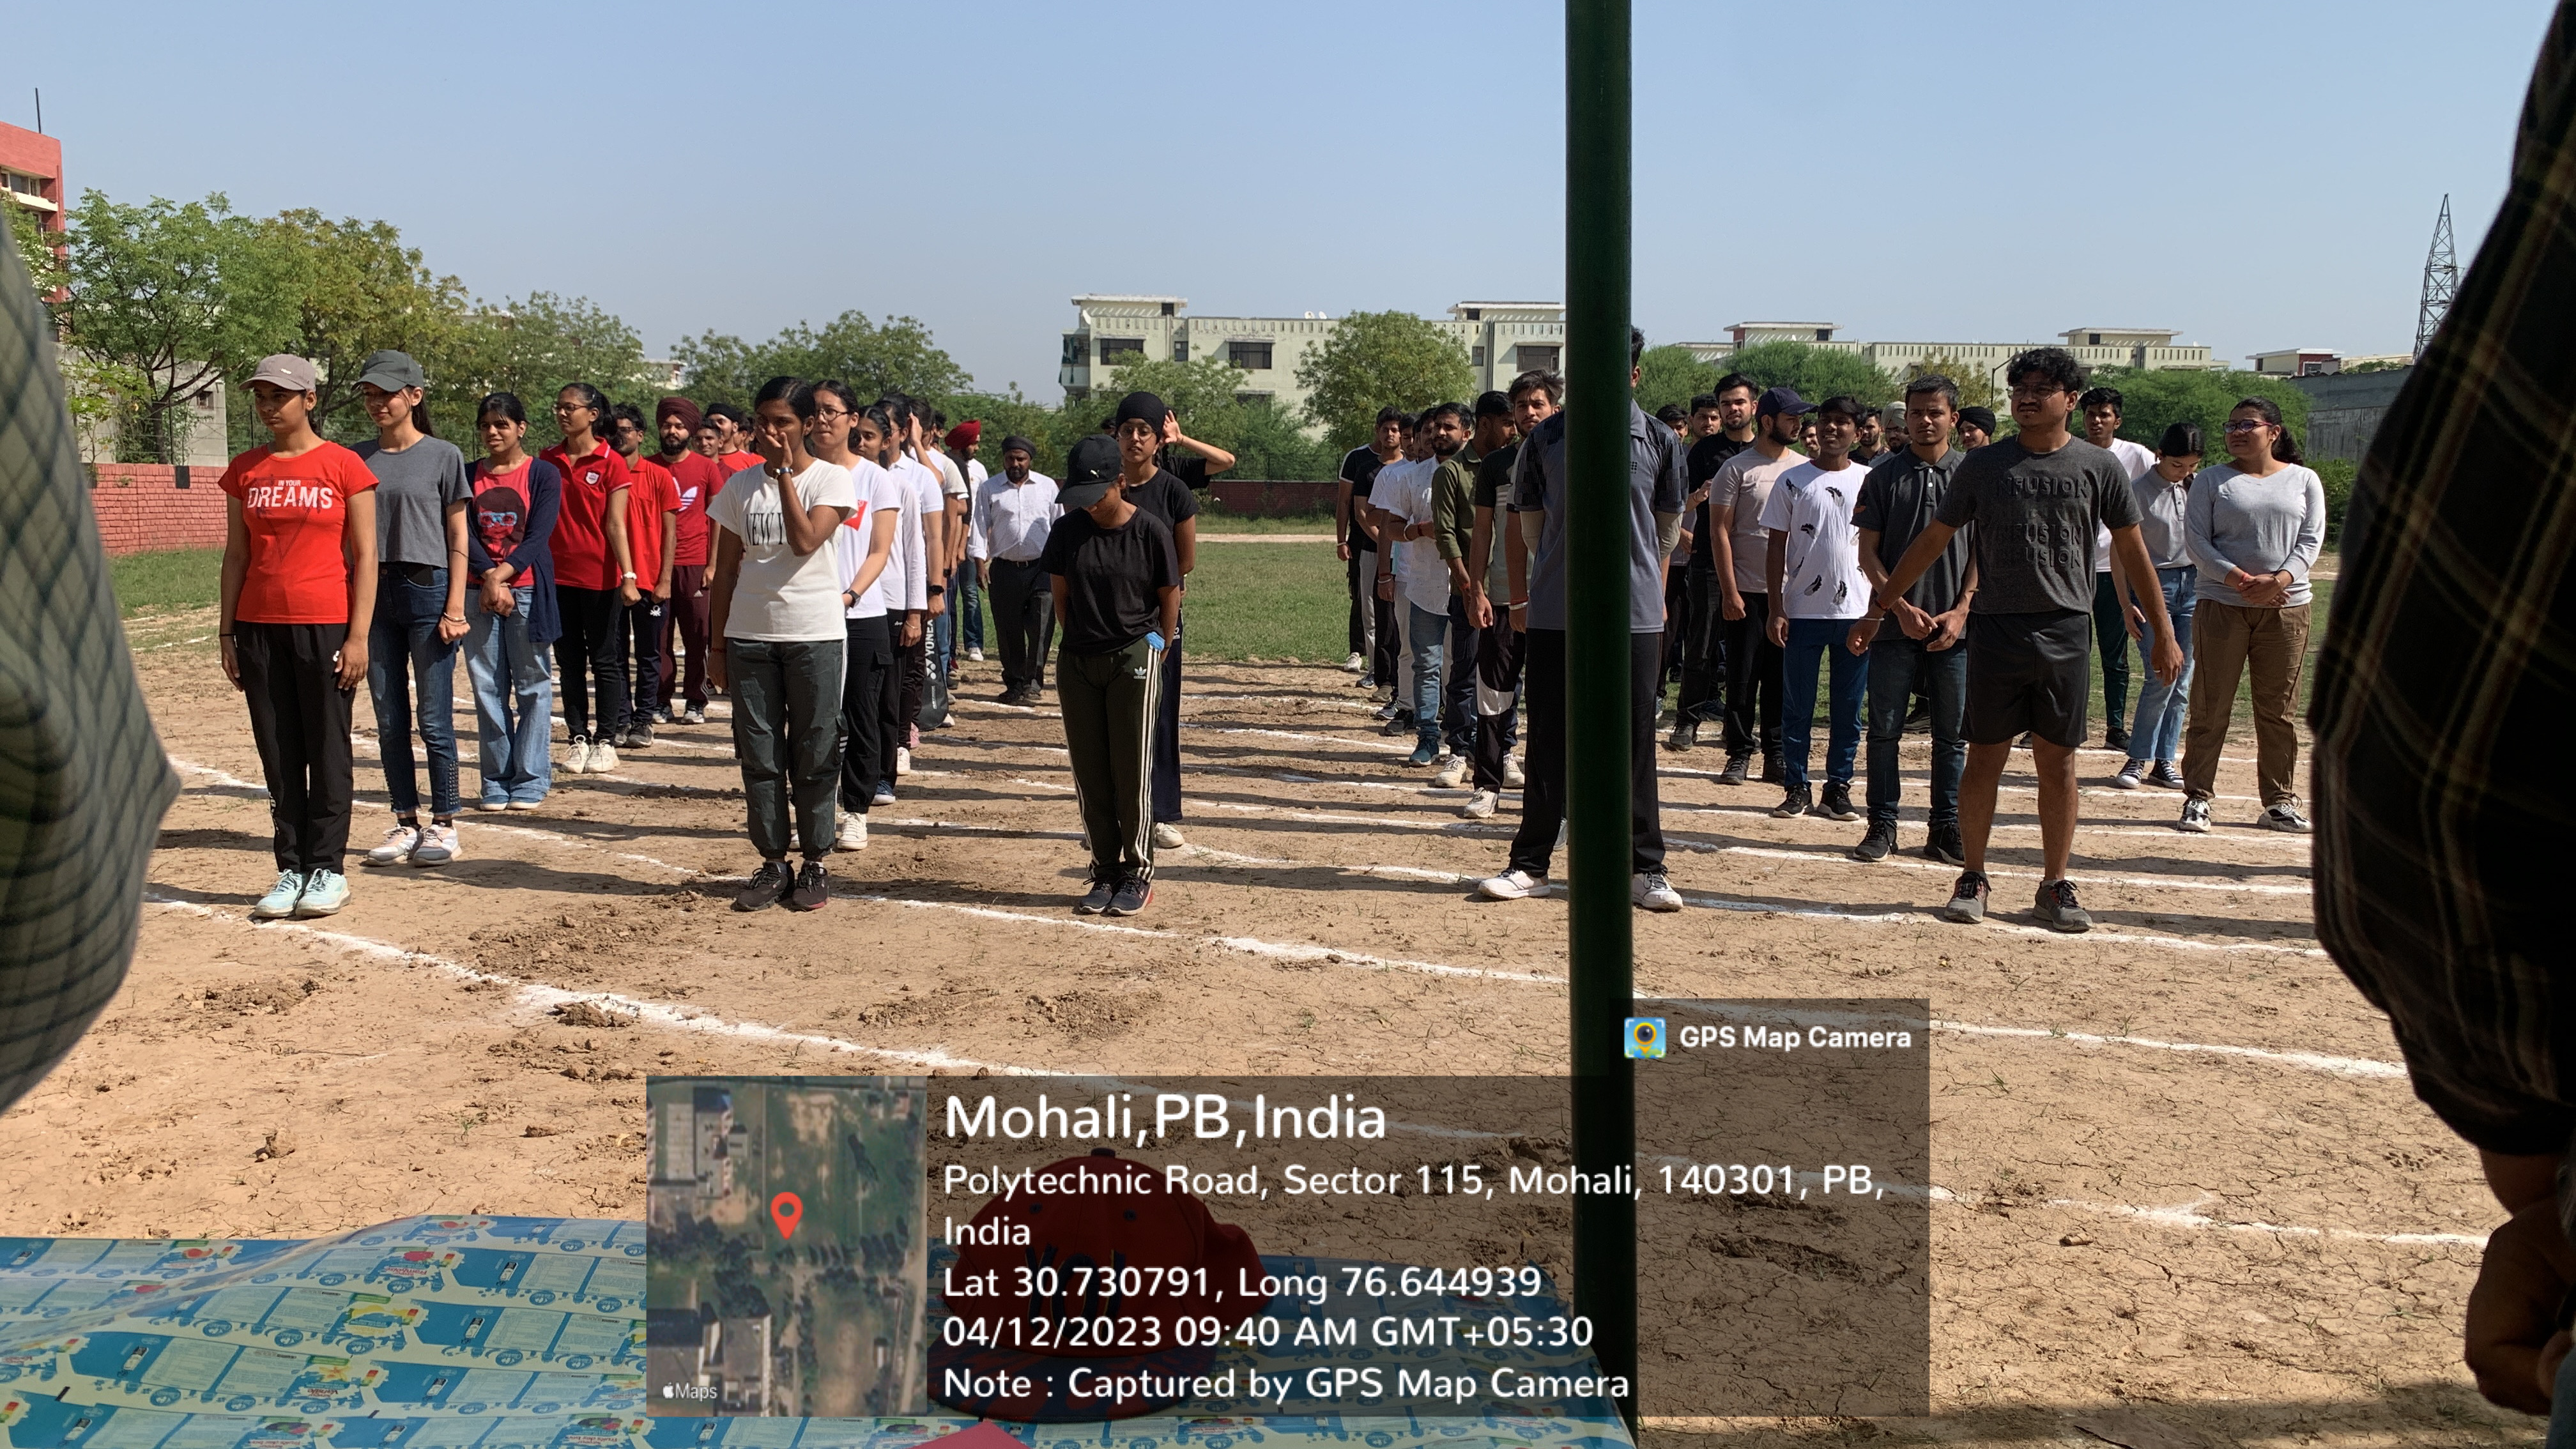 Sports Meet Conducted at IKG Mohali Campus-1 on dated 13 & 14 April 2023